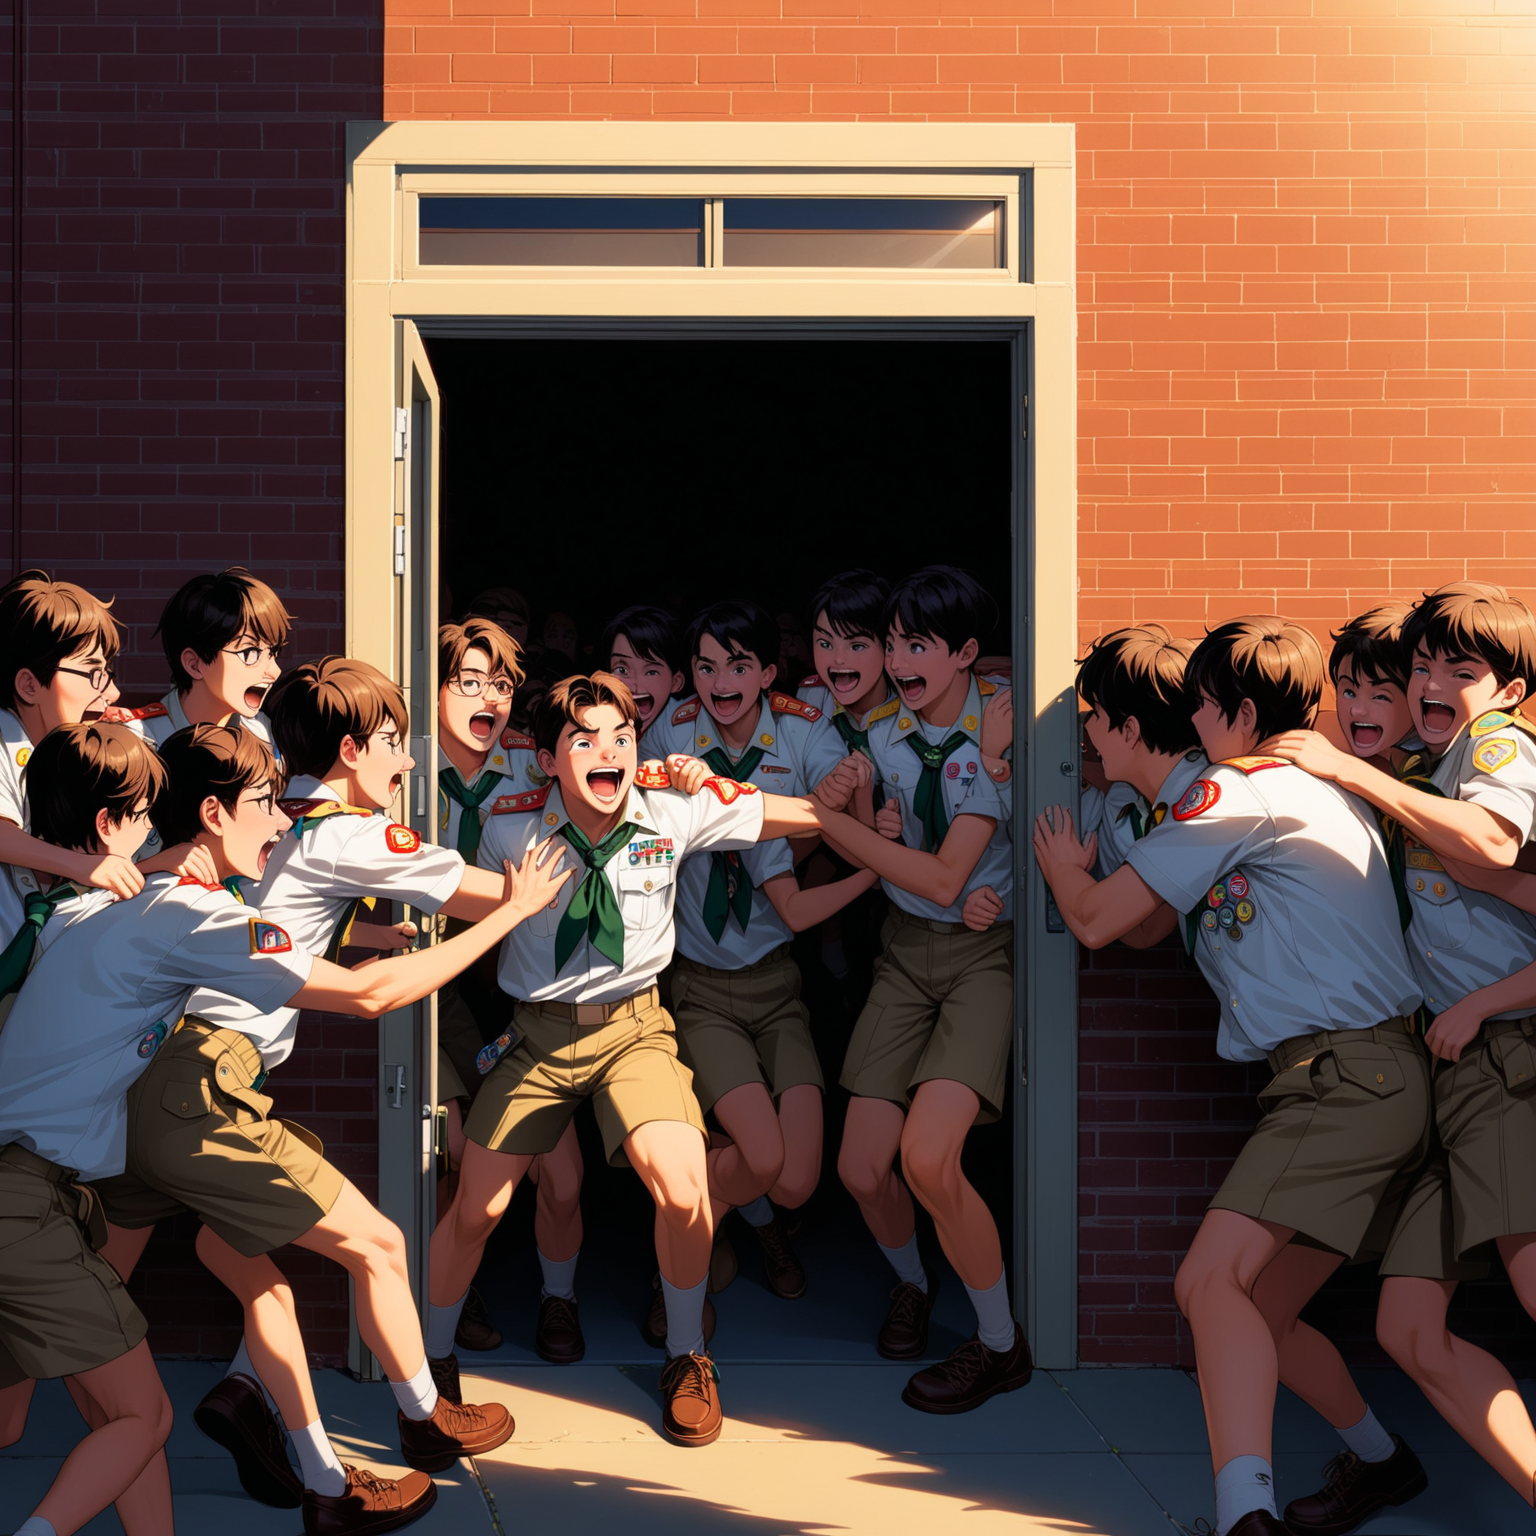 a doorway of a brick high school in Seattle at sunset. A shadowy chaotic crowd of high school freshman boys wearing boy scout uniforms are rushing the door and wrestling to get a view out side the door. The boys have laughing looks on their faces